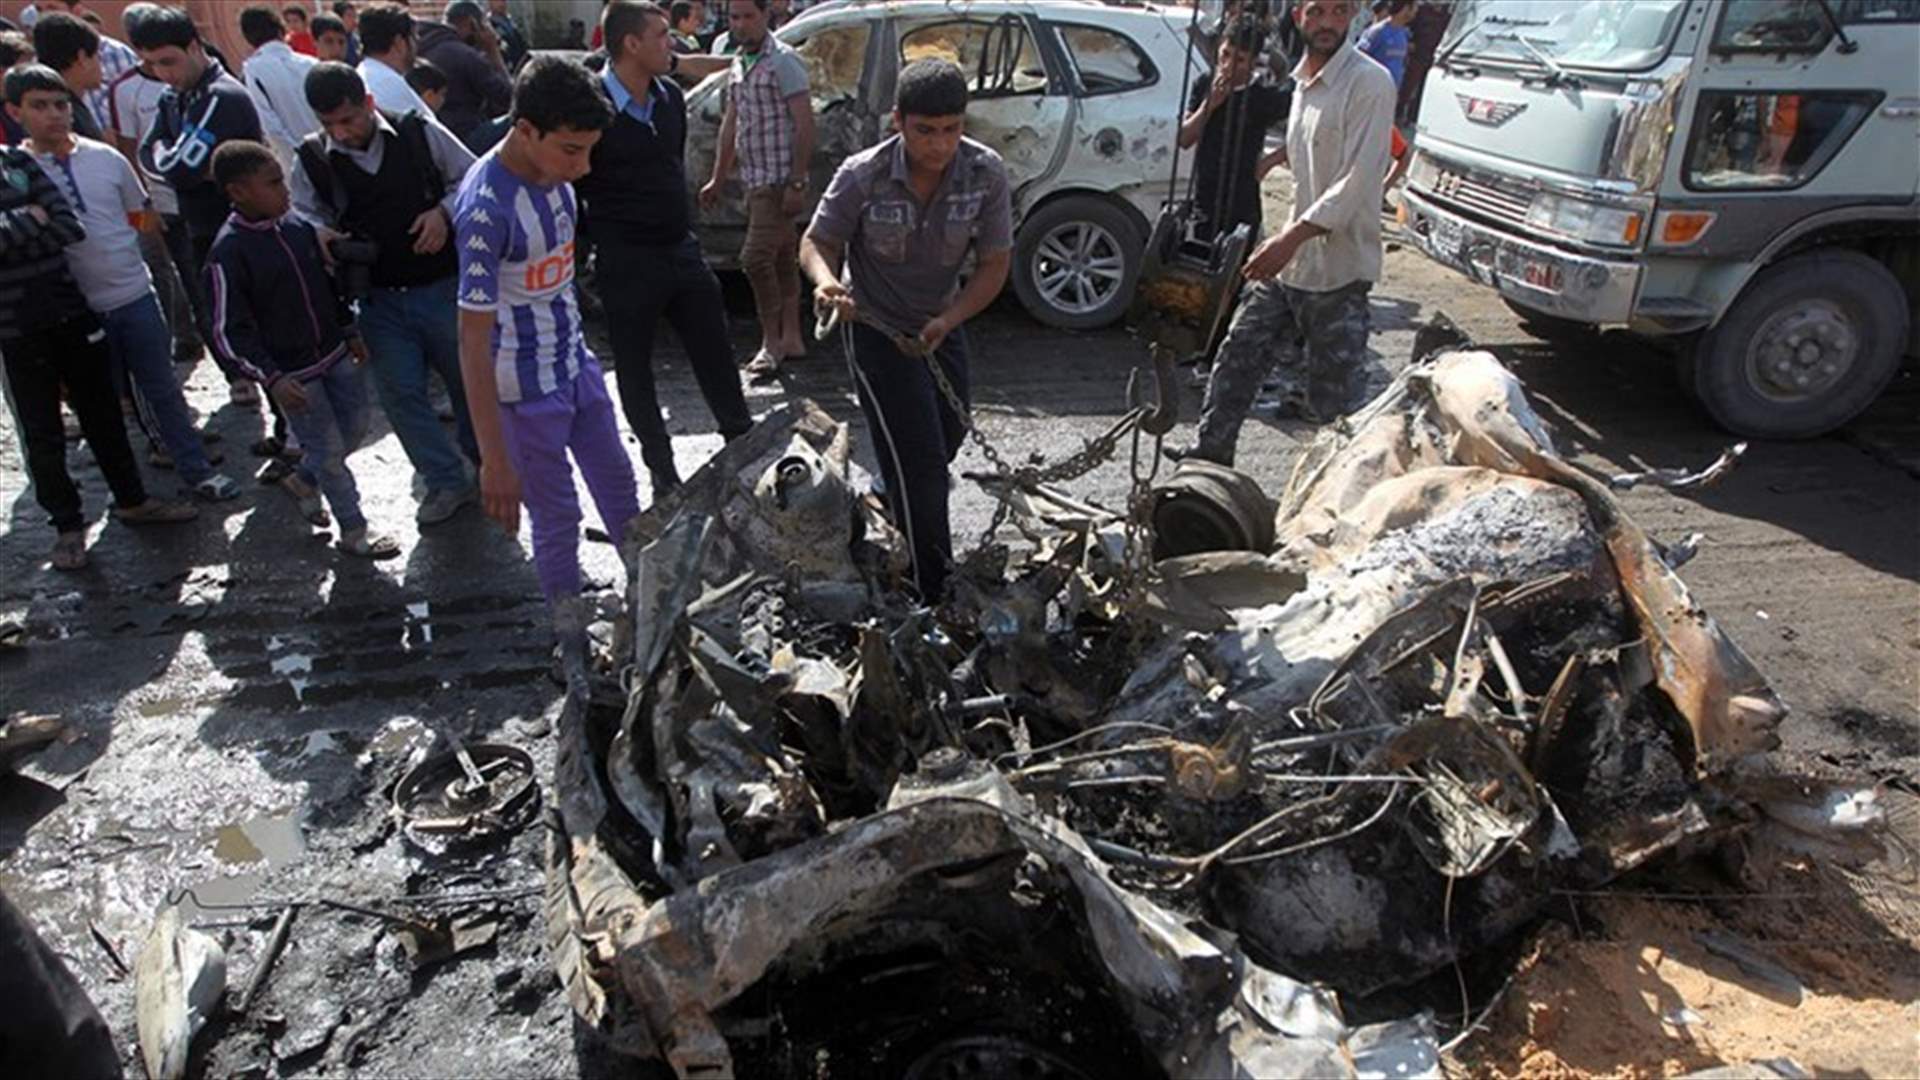 Death toll from bombing in Baghdad&#39;s Sadr City rises to 50, sources say